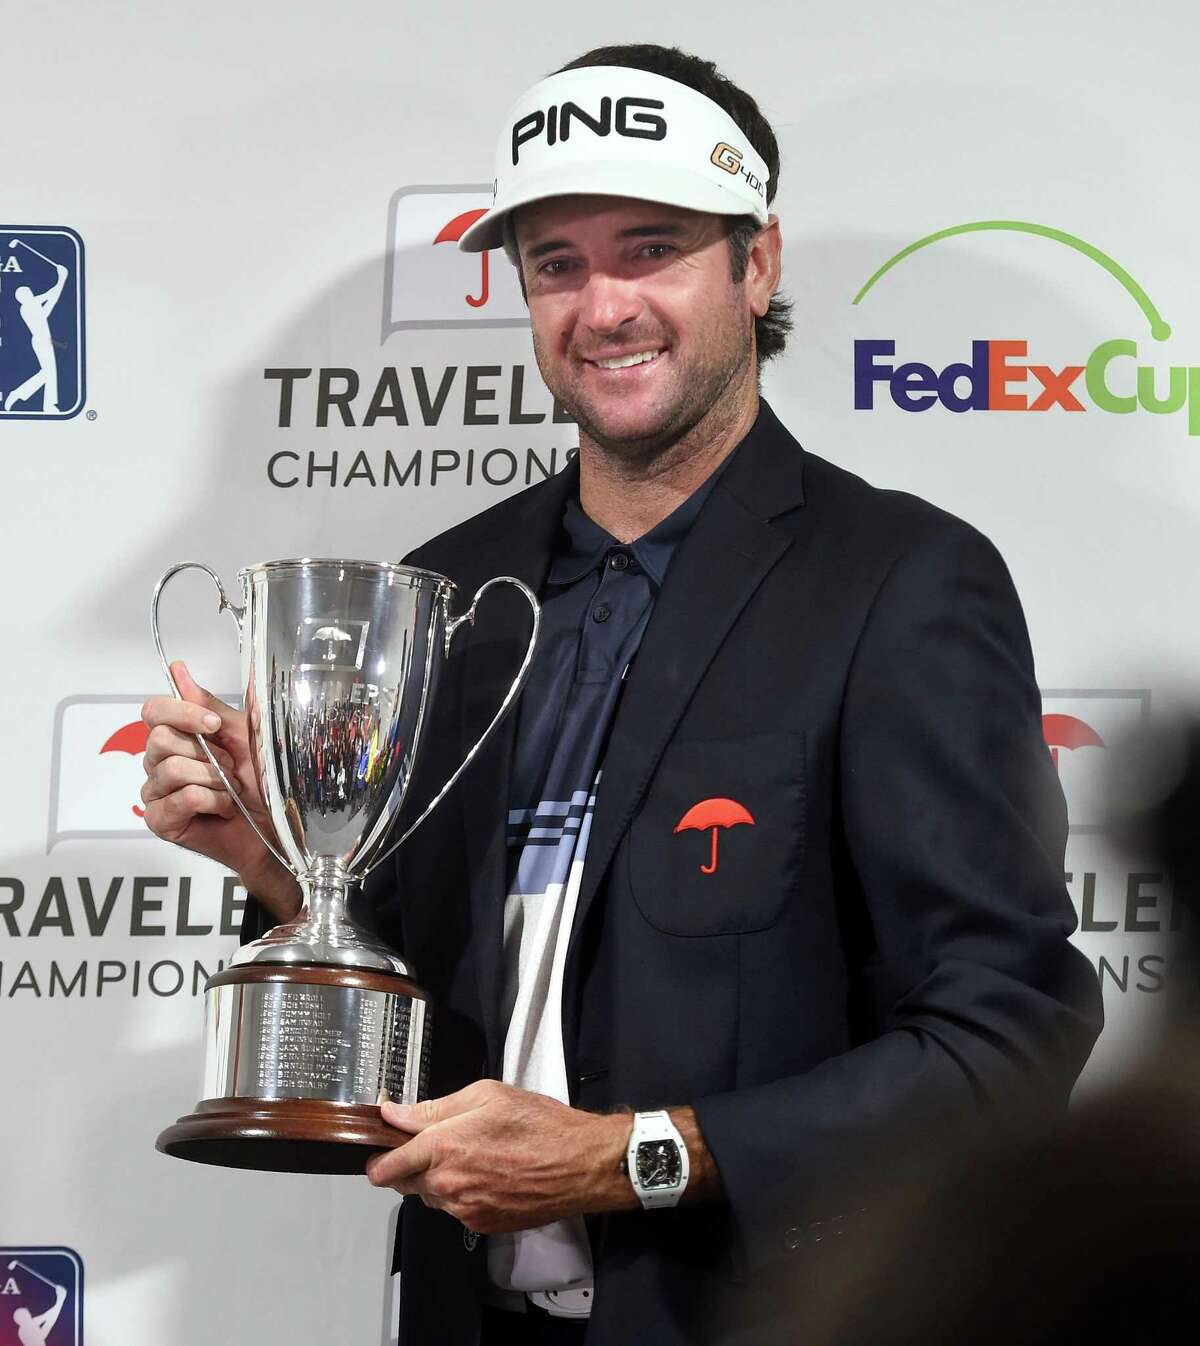 Bubba Watson holds the trophy after winning the Travelers Championship in 2018.